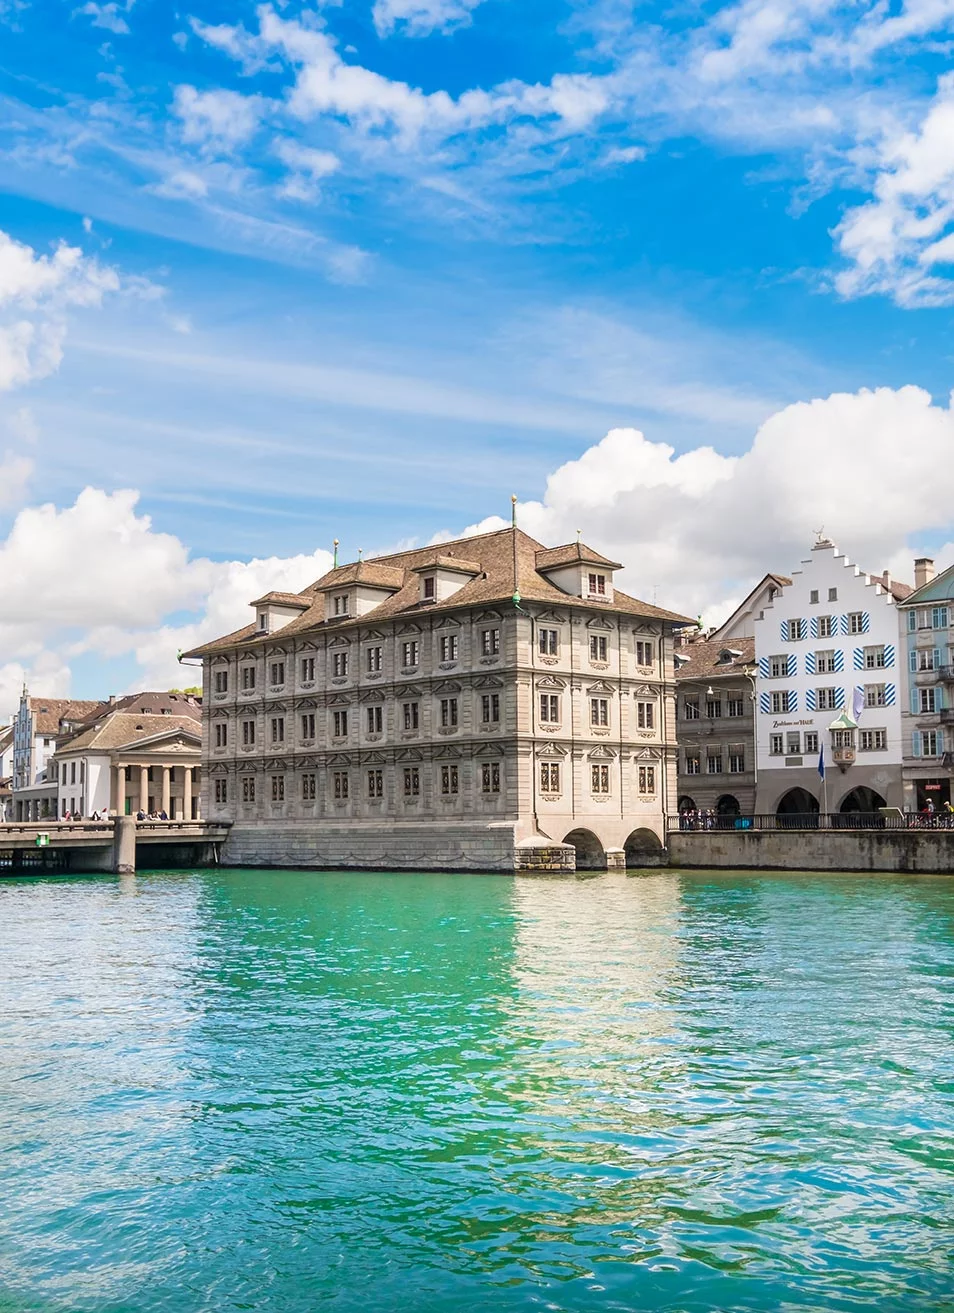 Zurich itinerary - Things to do in Zurich - Rathaus on the water